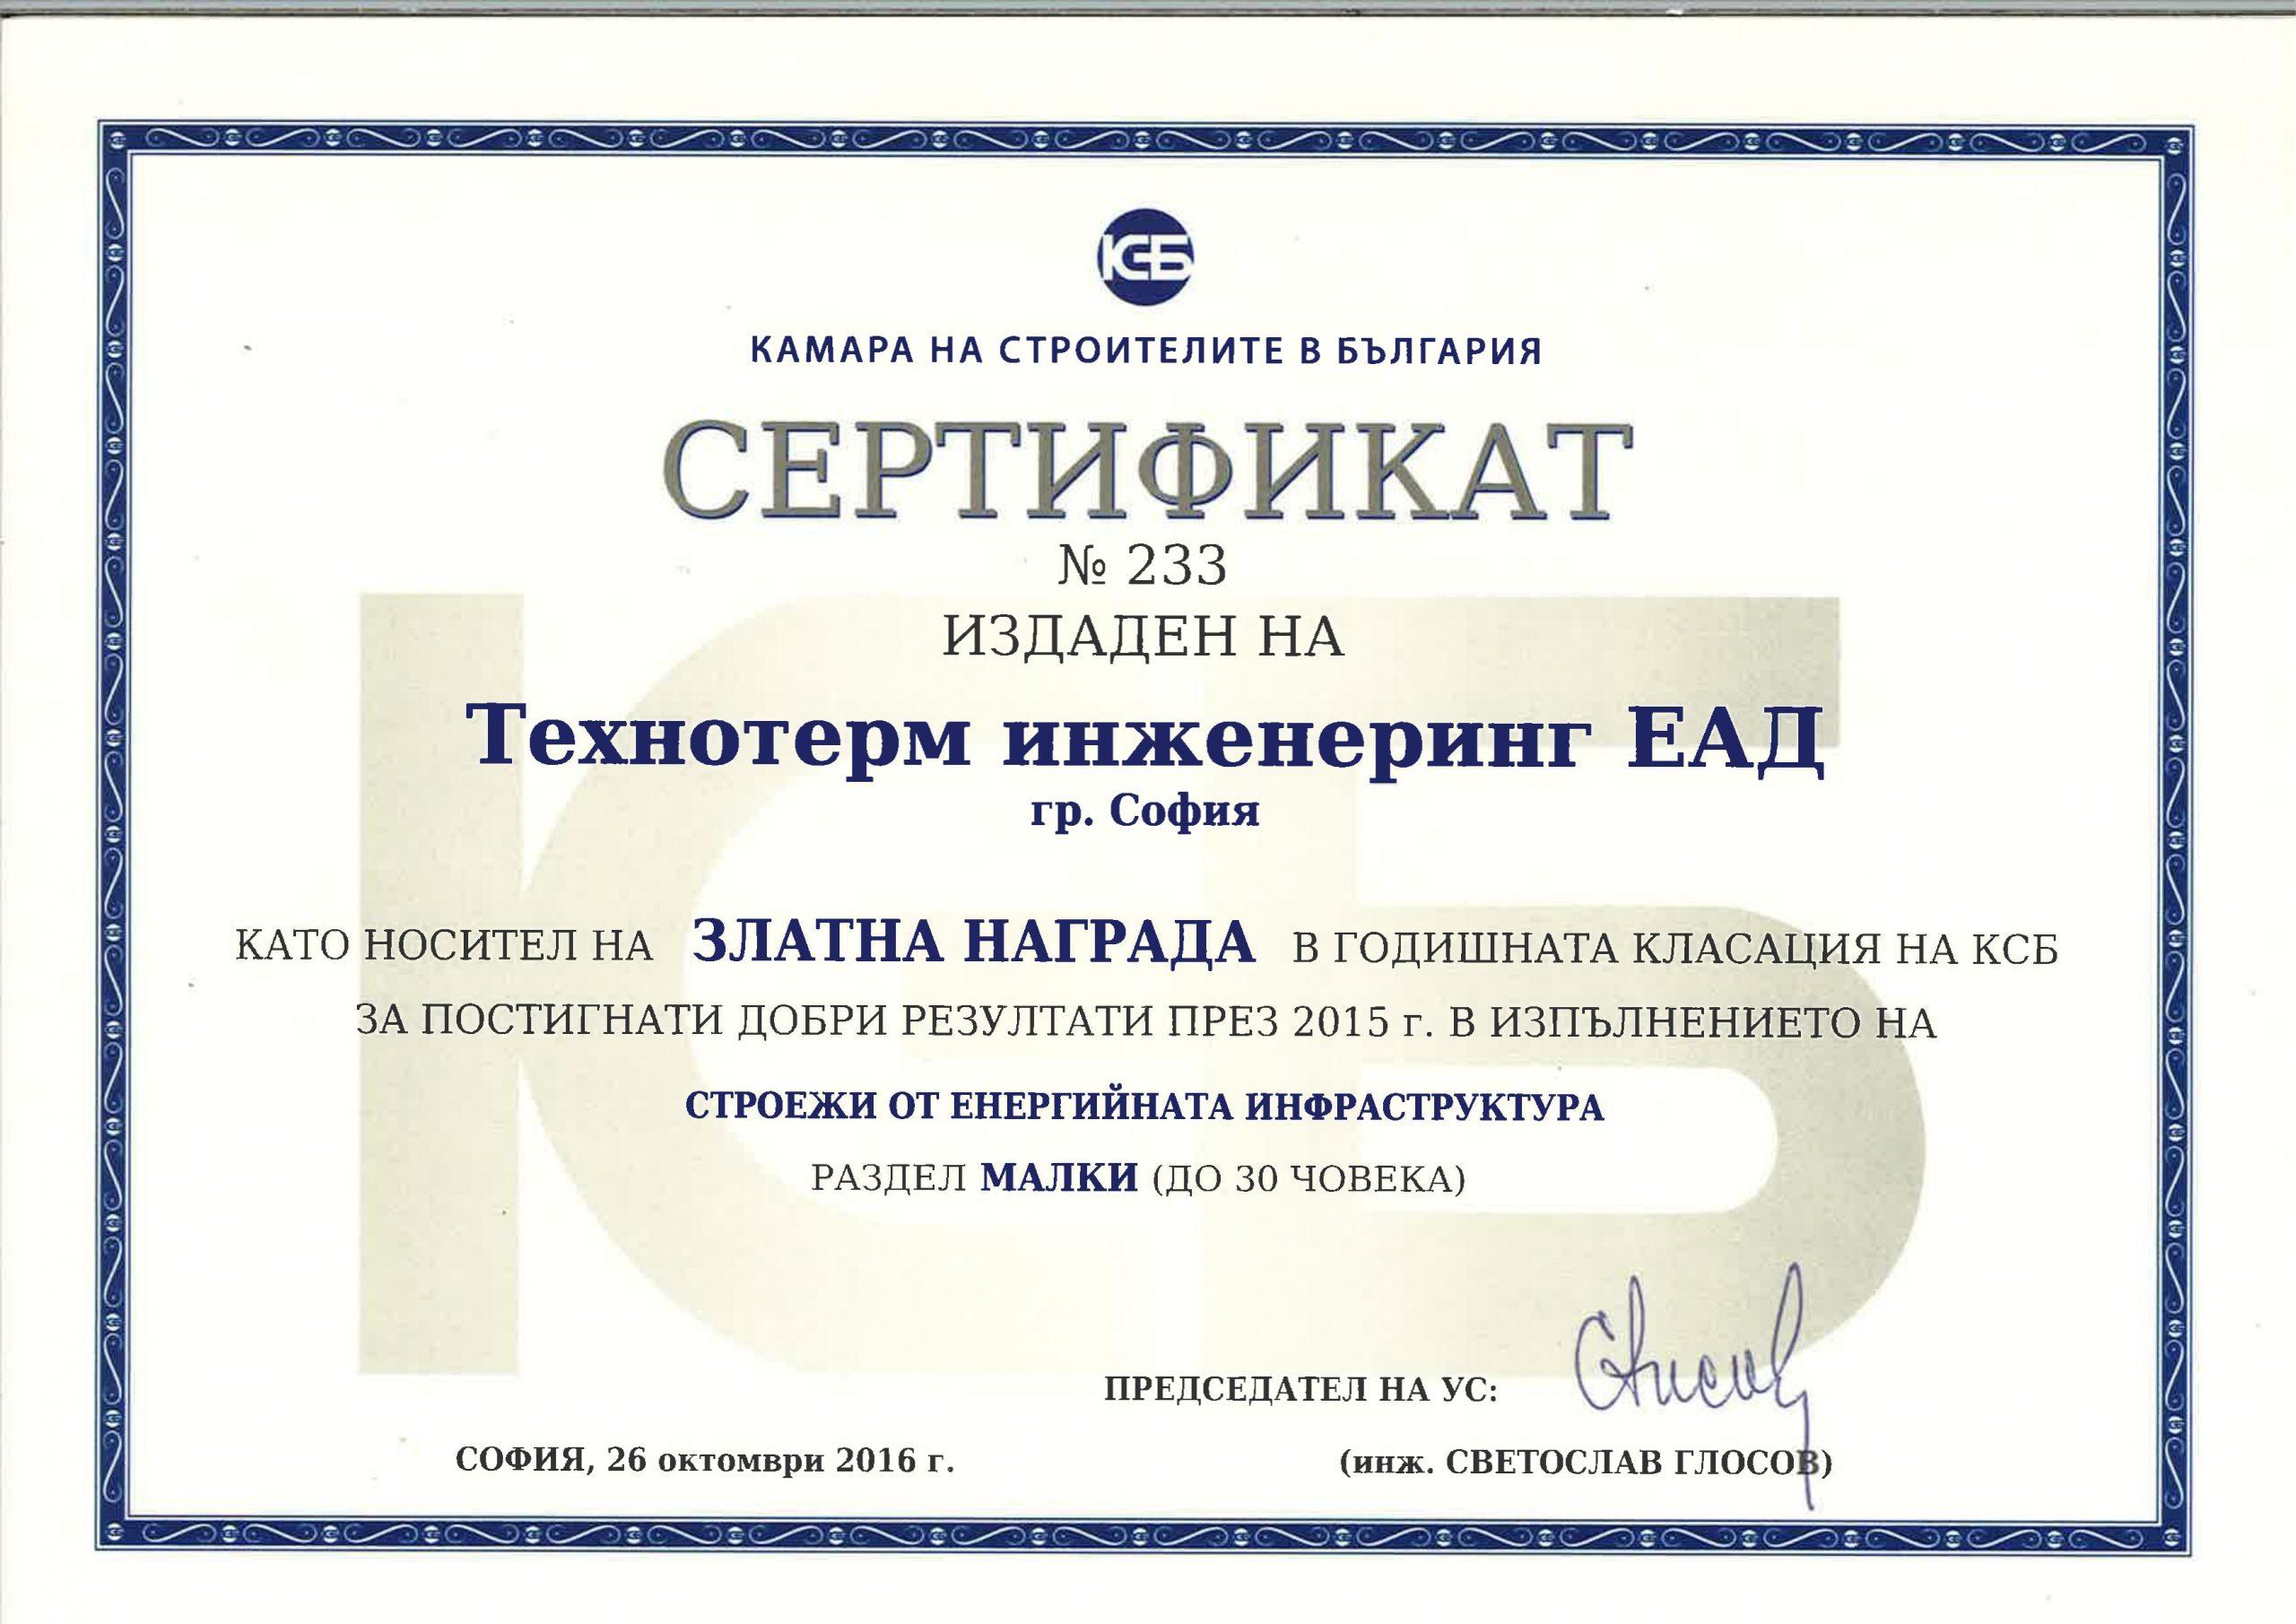 Another award for Technoterm Engineering EAD